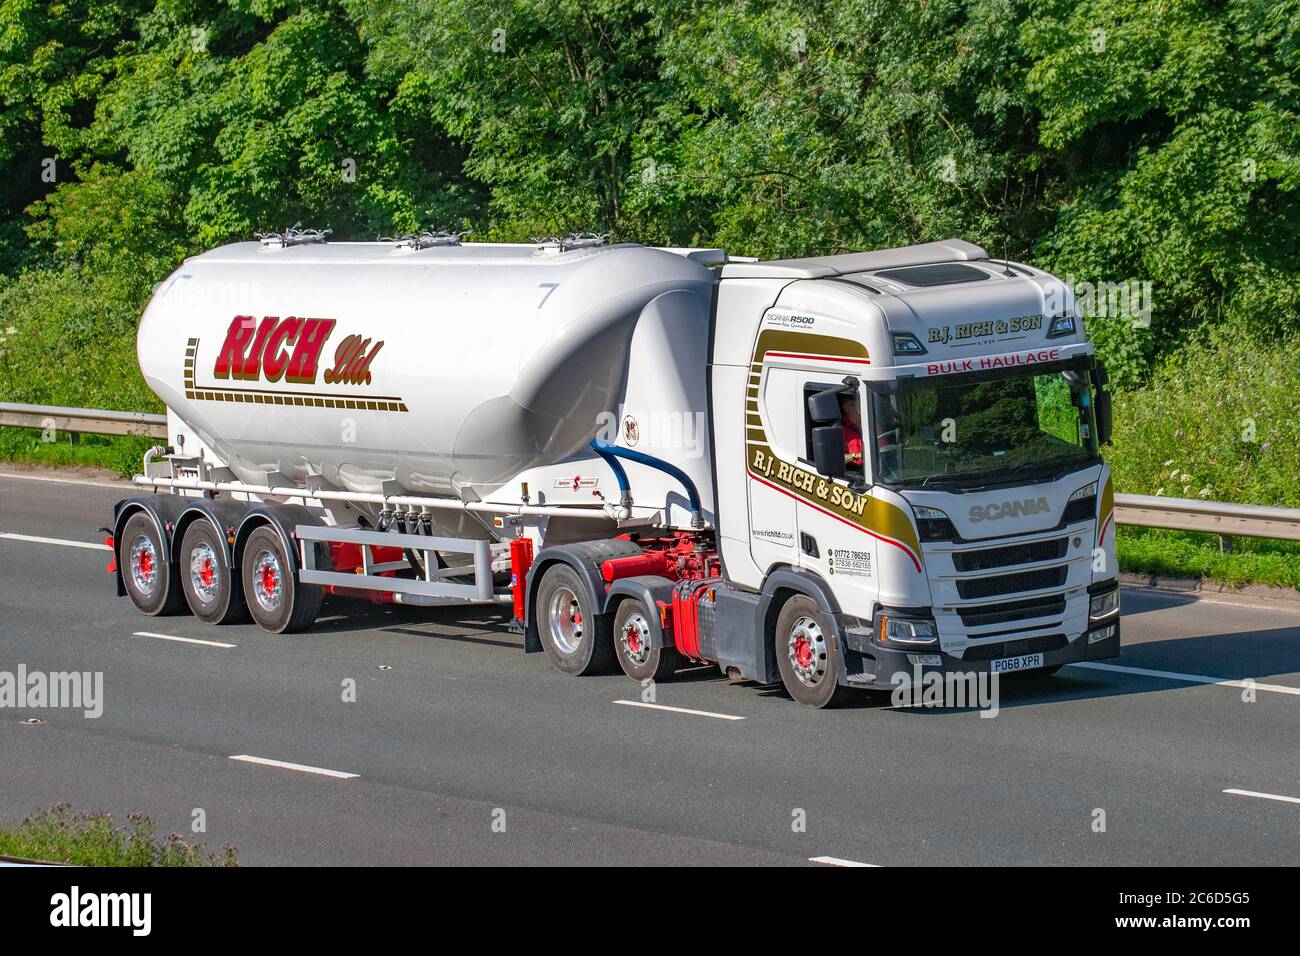 R J Rich  & SON; Bulk Powder Haulage delivery trucks, lorry, transportation, Spitzer Eurovrac commercial vehicles, truck, cargo carrier, Scania R500 vehicle, European commercial transport industry HGV, M6 at Manchester, UK Stock Photo